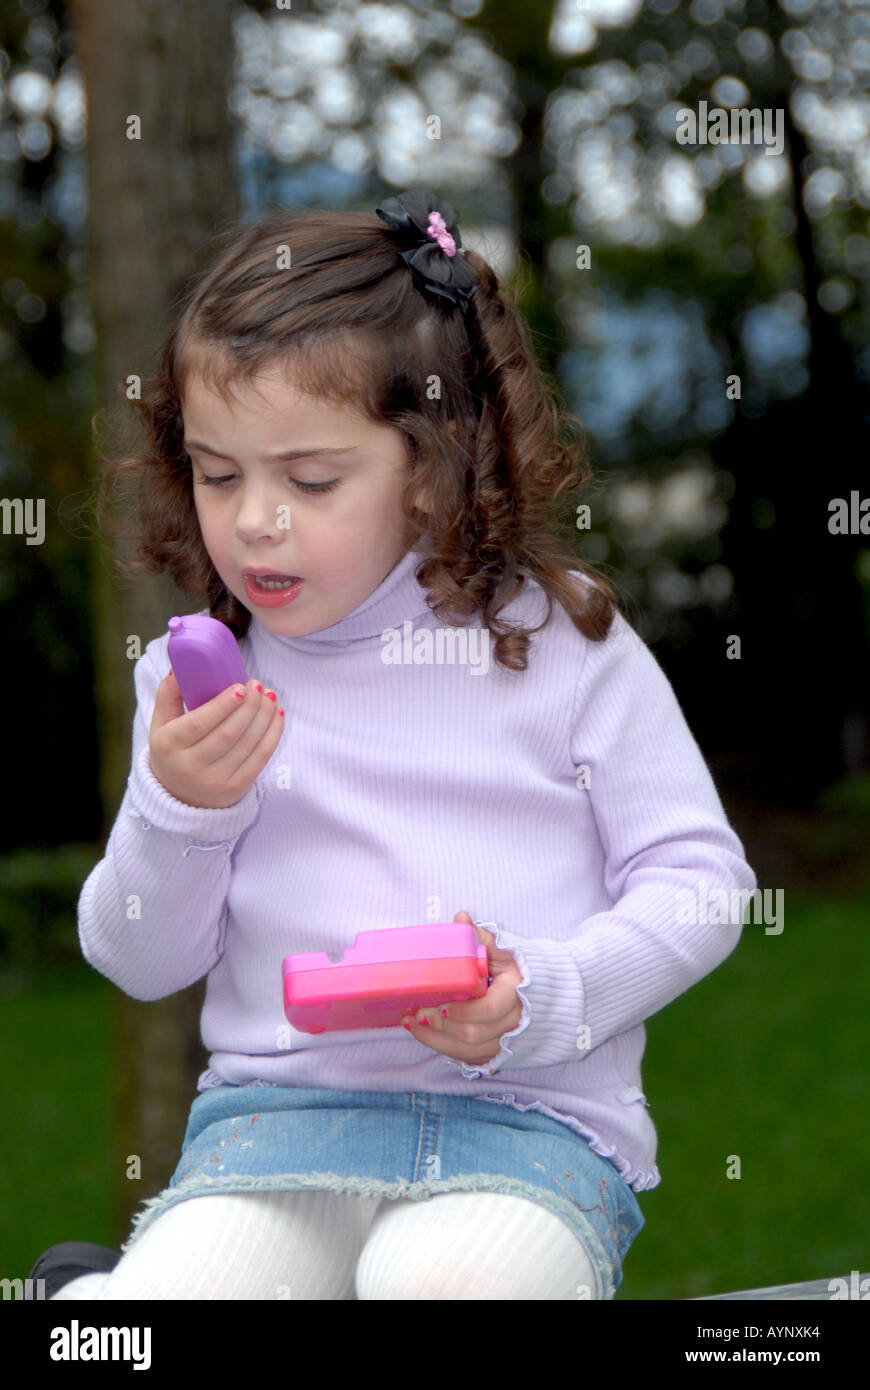 Three year old girl seated on an outdoor bench studying a toy telephone Stock Photo